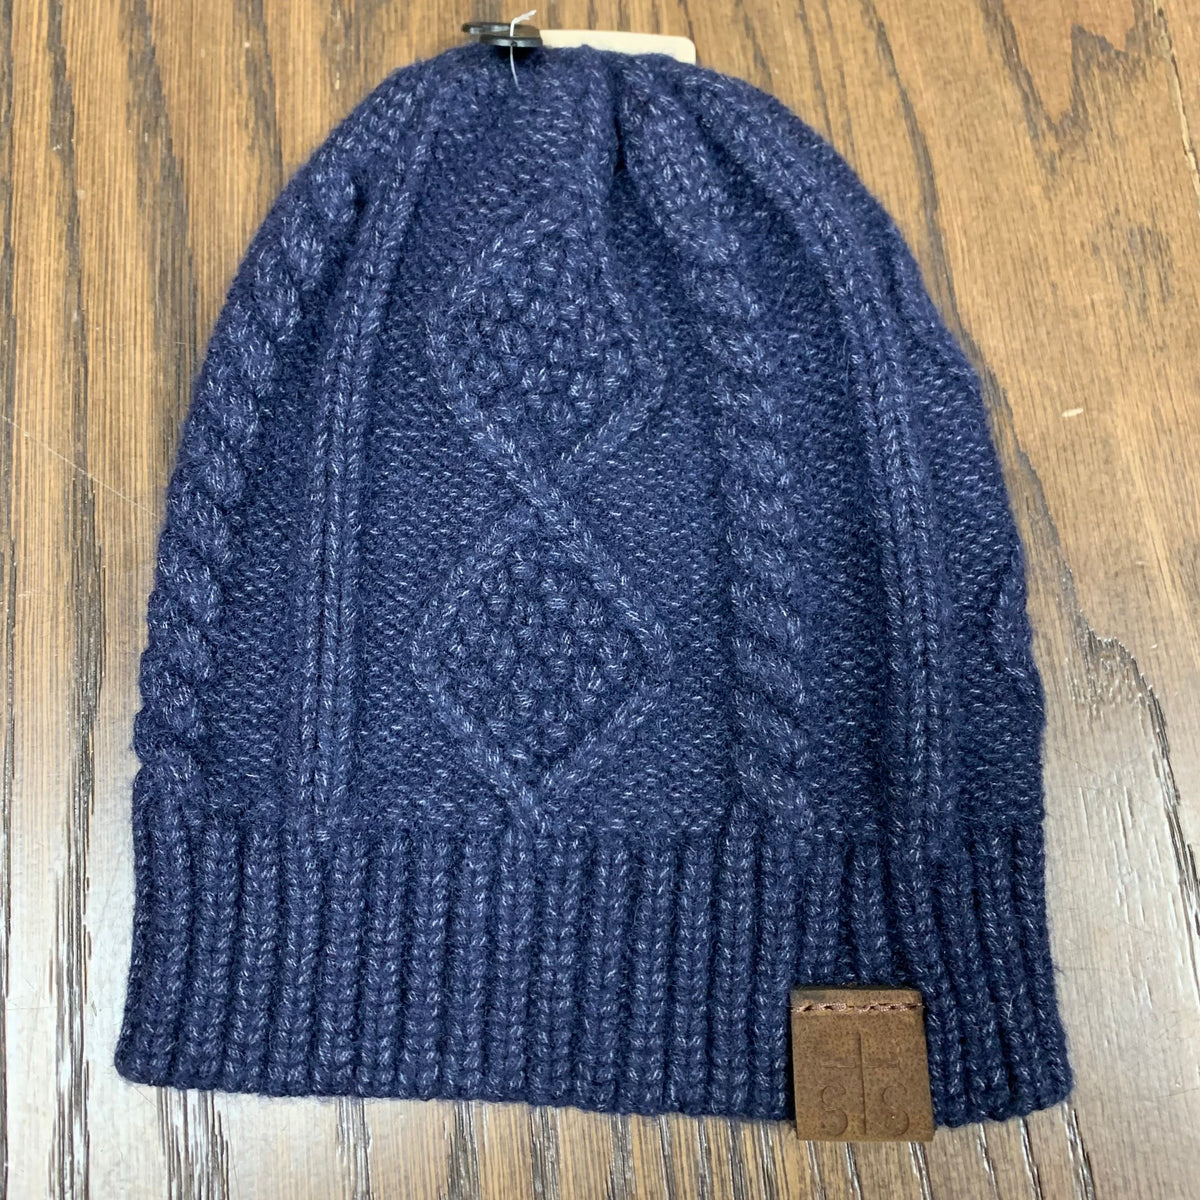 STS Ranchwear Cable Knit Beanie in Navy